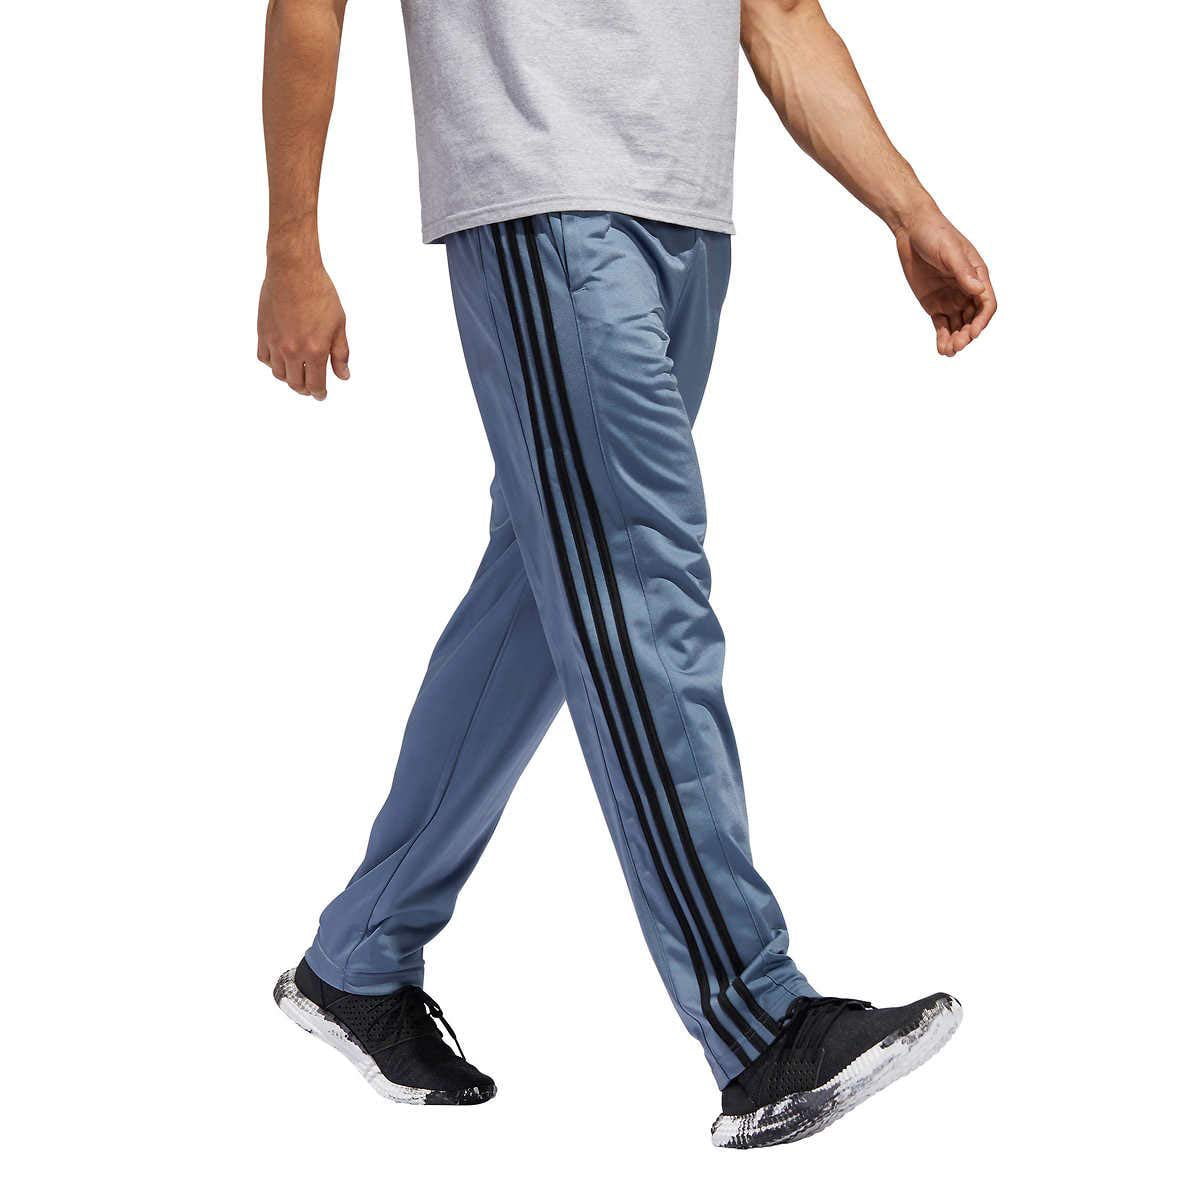 adidas Men's Essentials Tapered Track Pants - Macy's